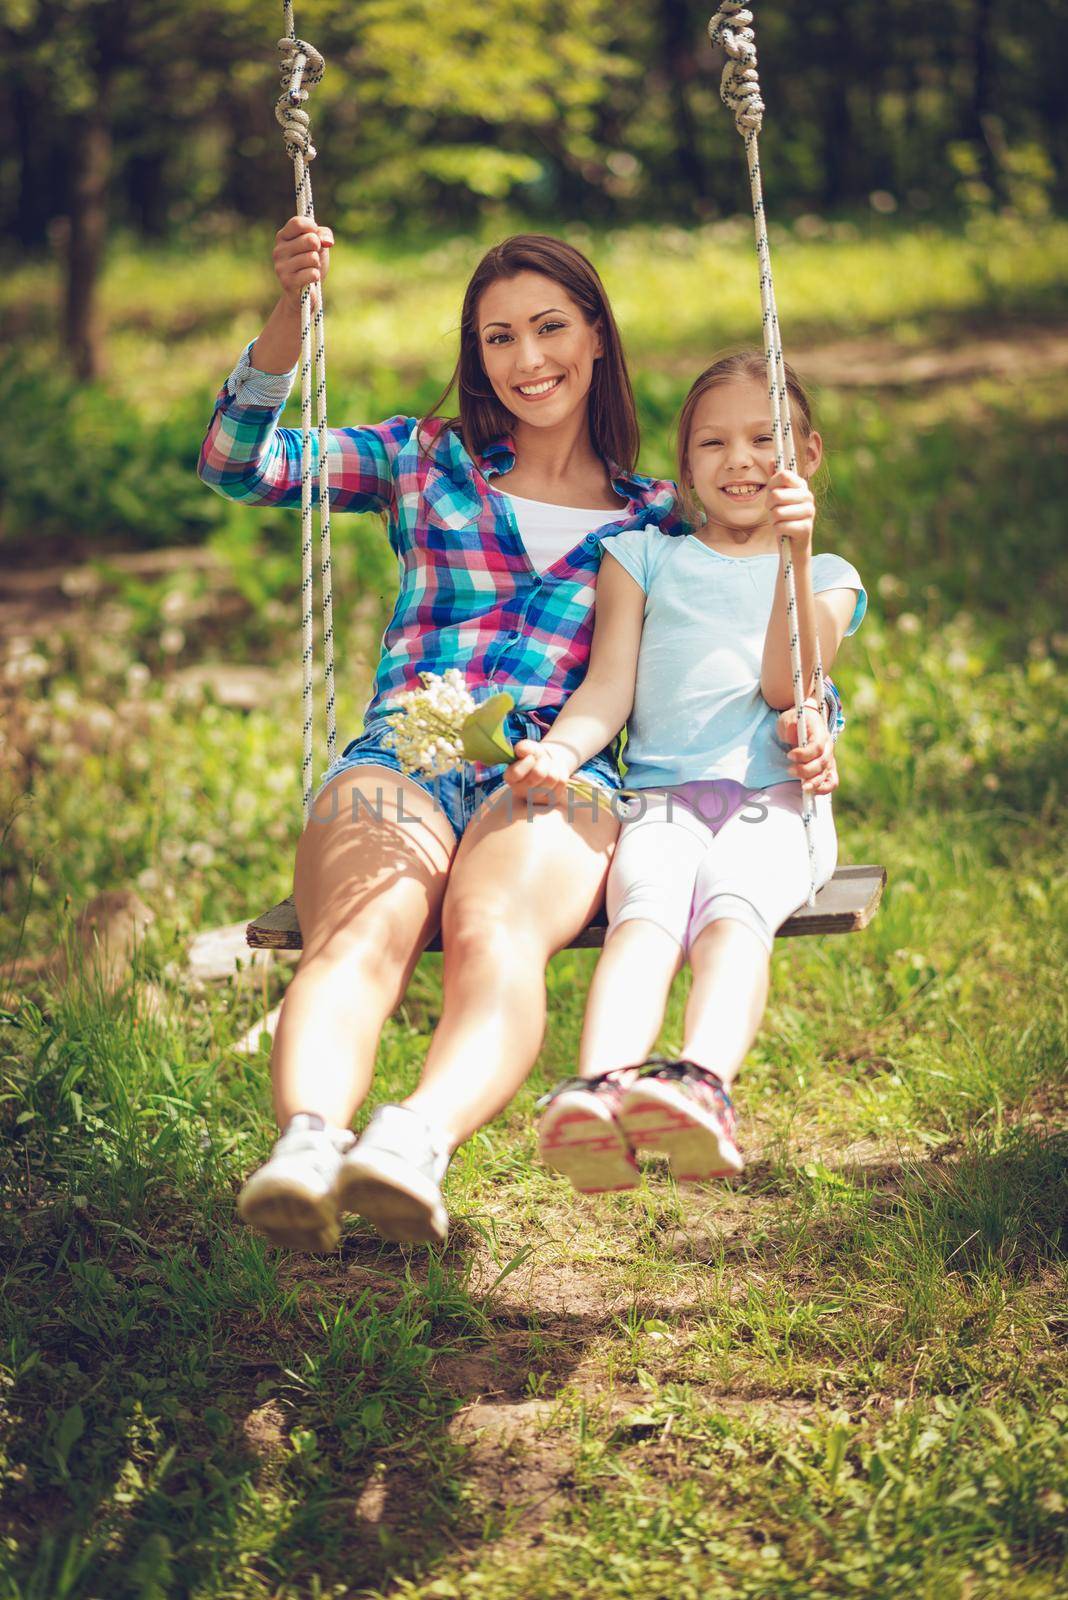 Happy young woman and little girl enjoying on the swing in the spring garden. Looking at camera.